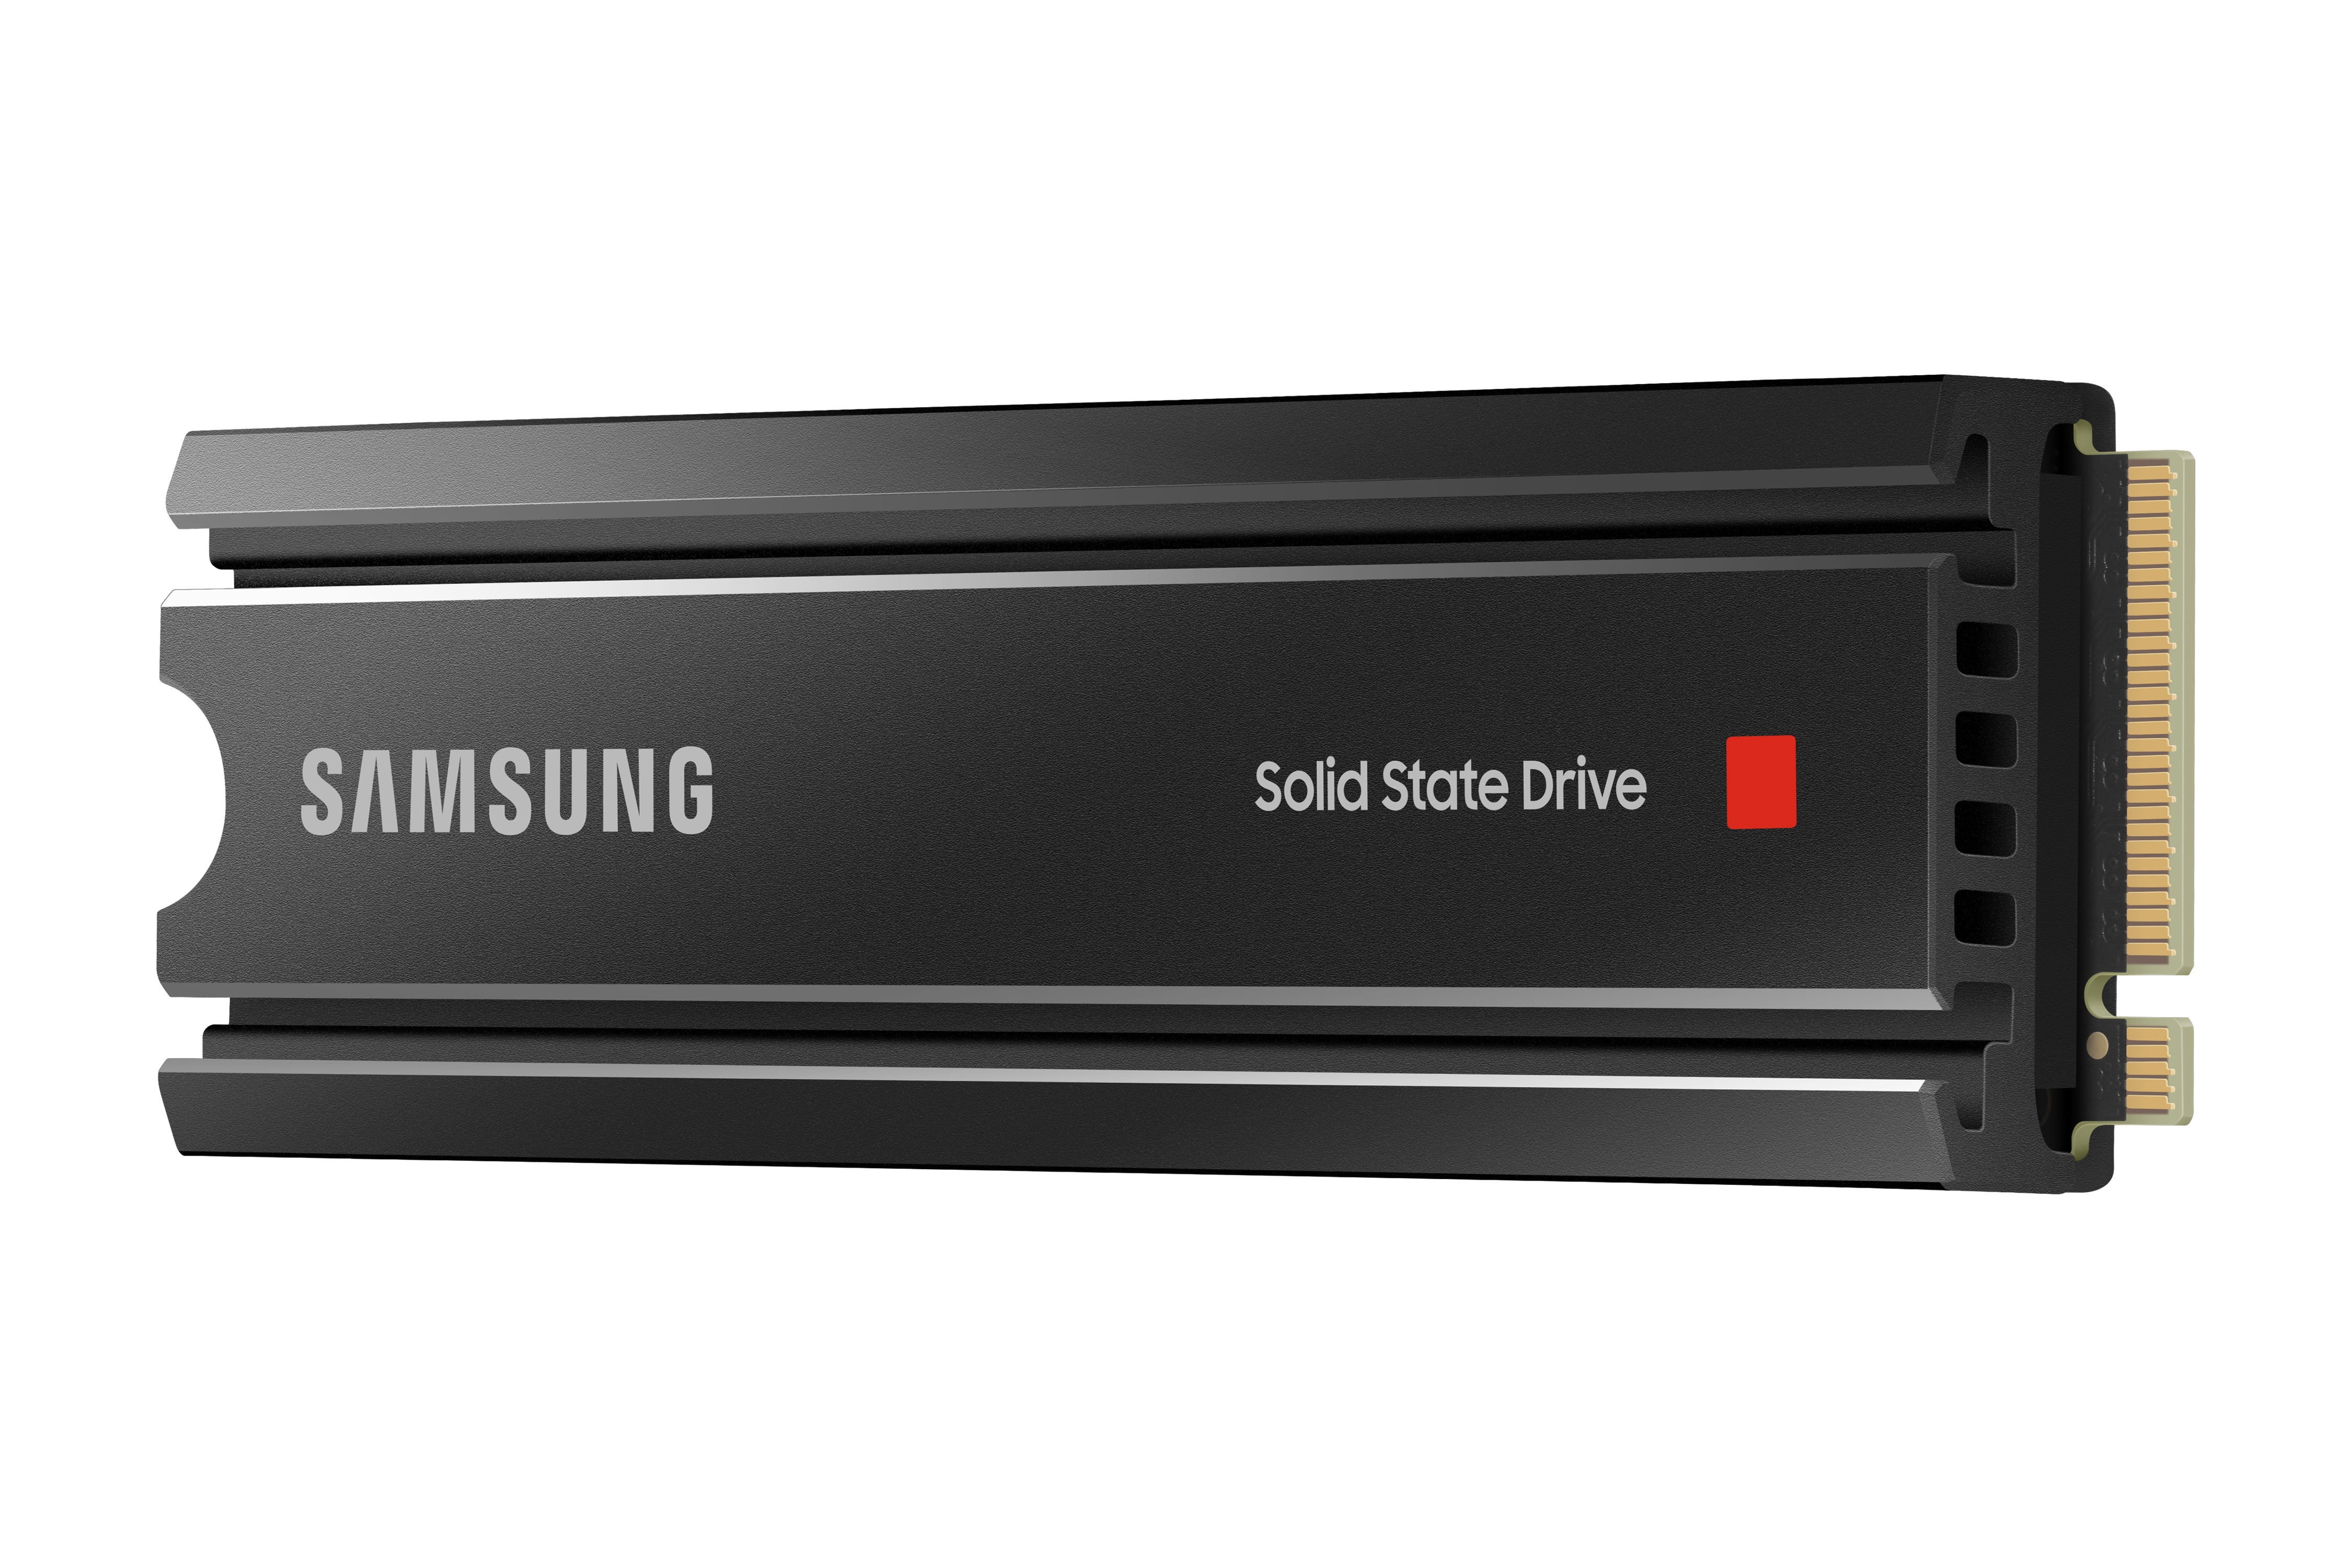 Samsung 980 PRO with Heatsink PCIe 4.0 M.2 SSD 2TB compatible with PS5 & PC.